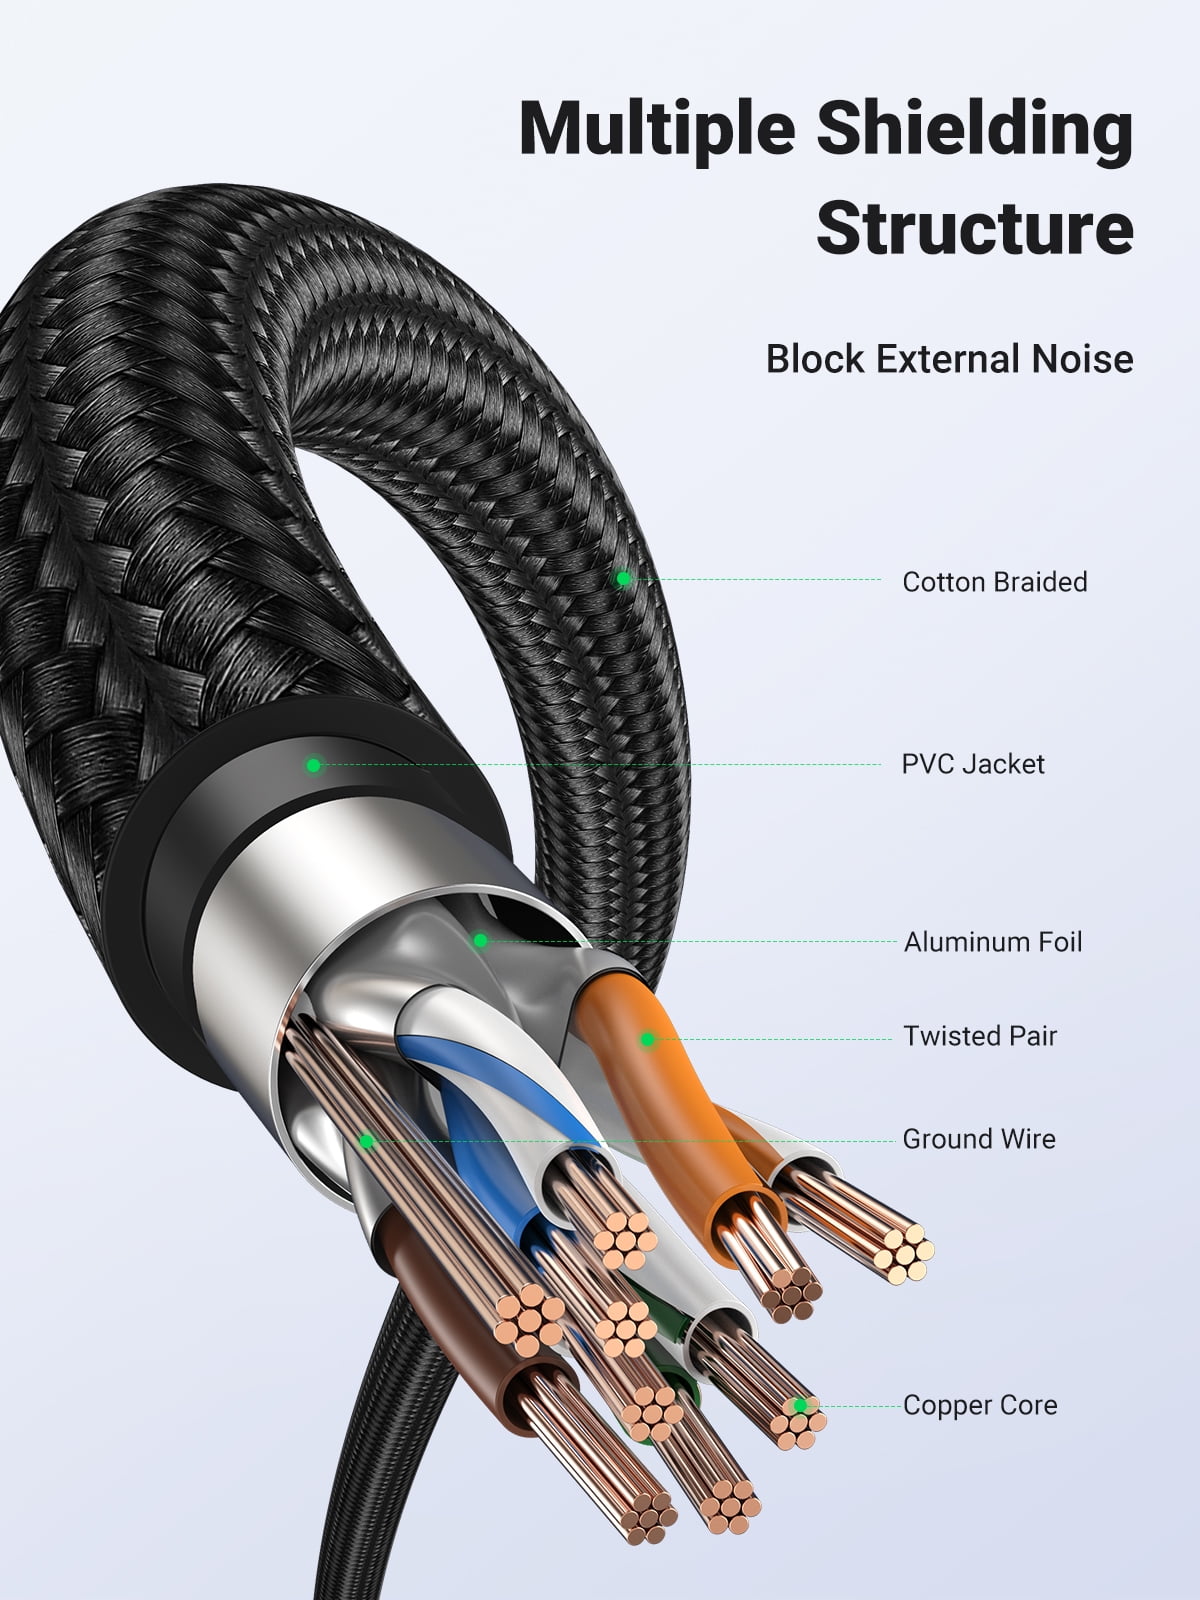 SAMZHE Ethernet Cable CAT7 10Gbps Cotton Braided Network Lan Cord